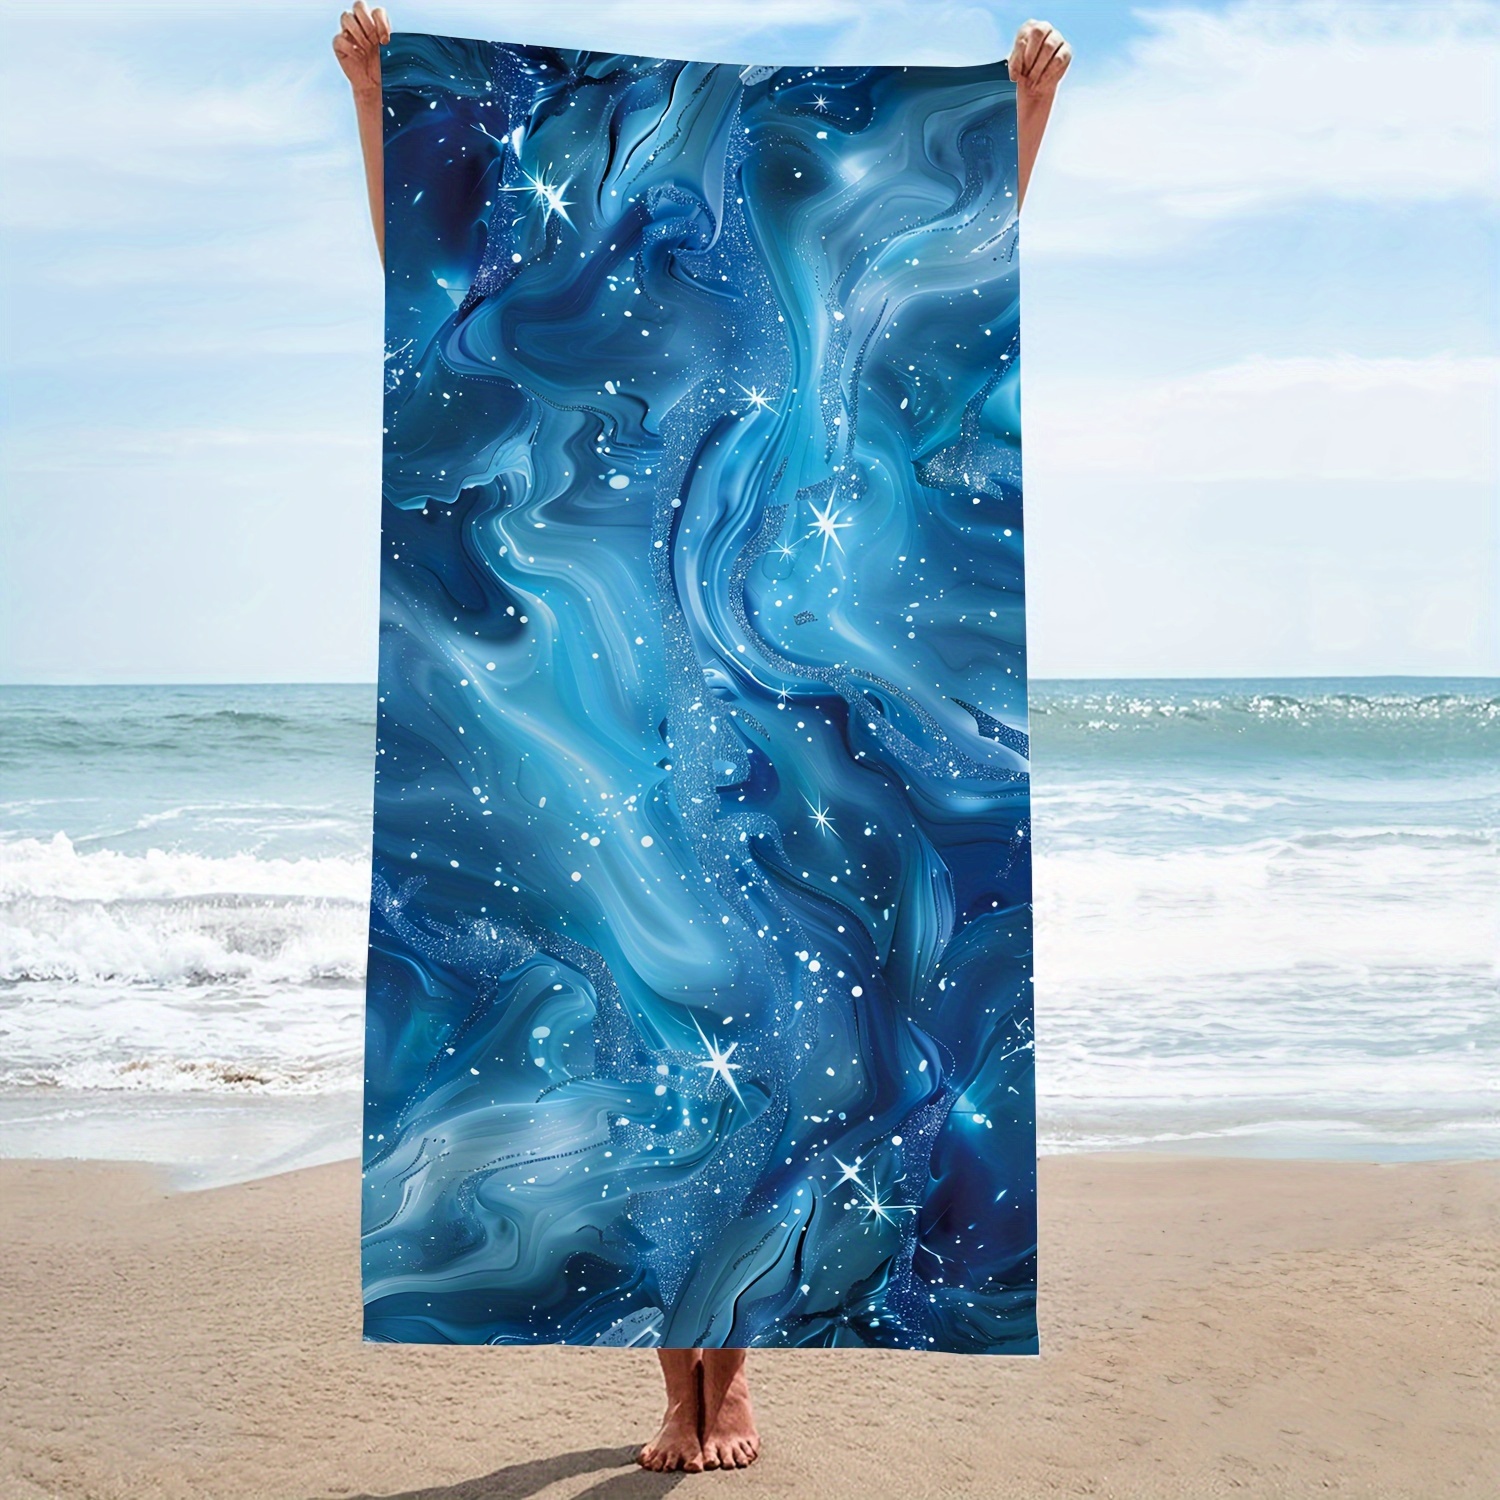 

1pc Marbled Microfiber Beach Towel, Dreamy Aesthetic Oversized Bath Towel, Durable Quick-drying Sunscreen Easy To Clean Super-absorbent Towel, Summer Beach Camping Pool Travel Supplies